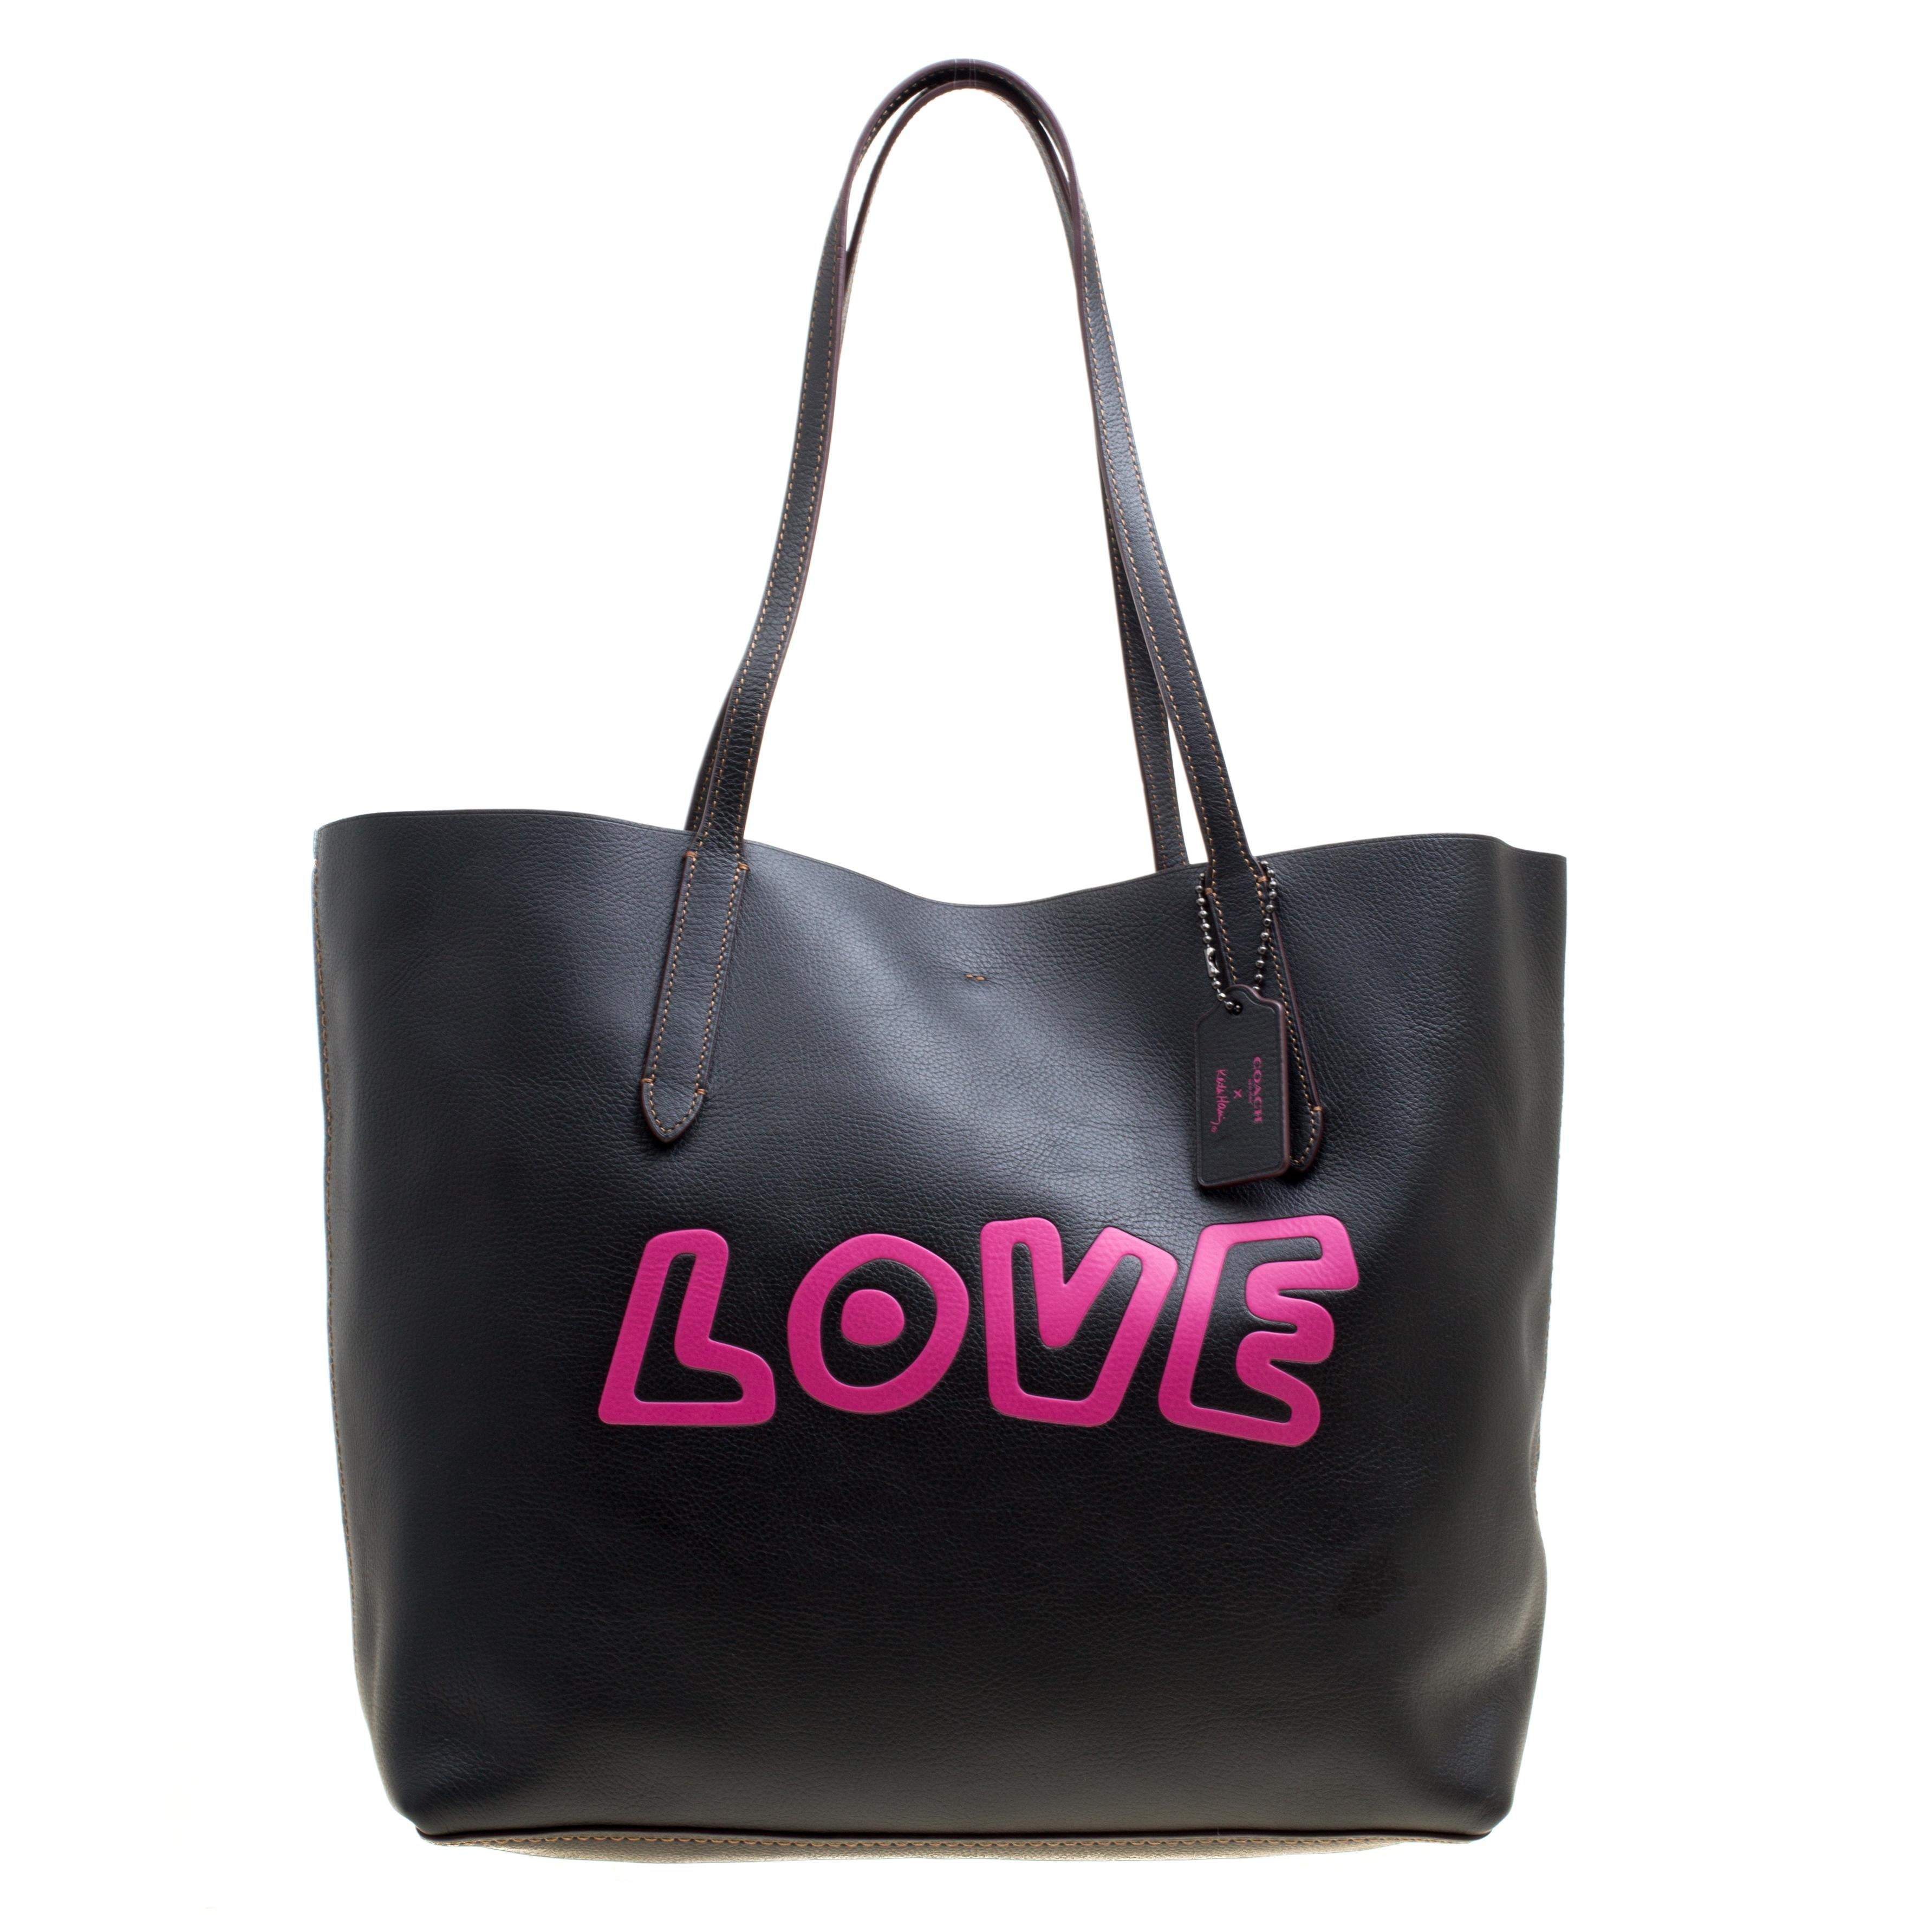 Coach Black Leather Keith Haring Love Shopper Tote